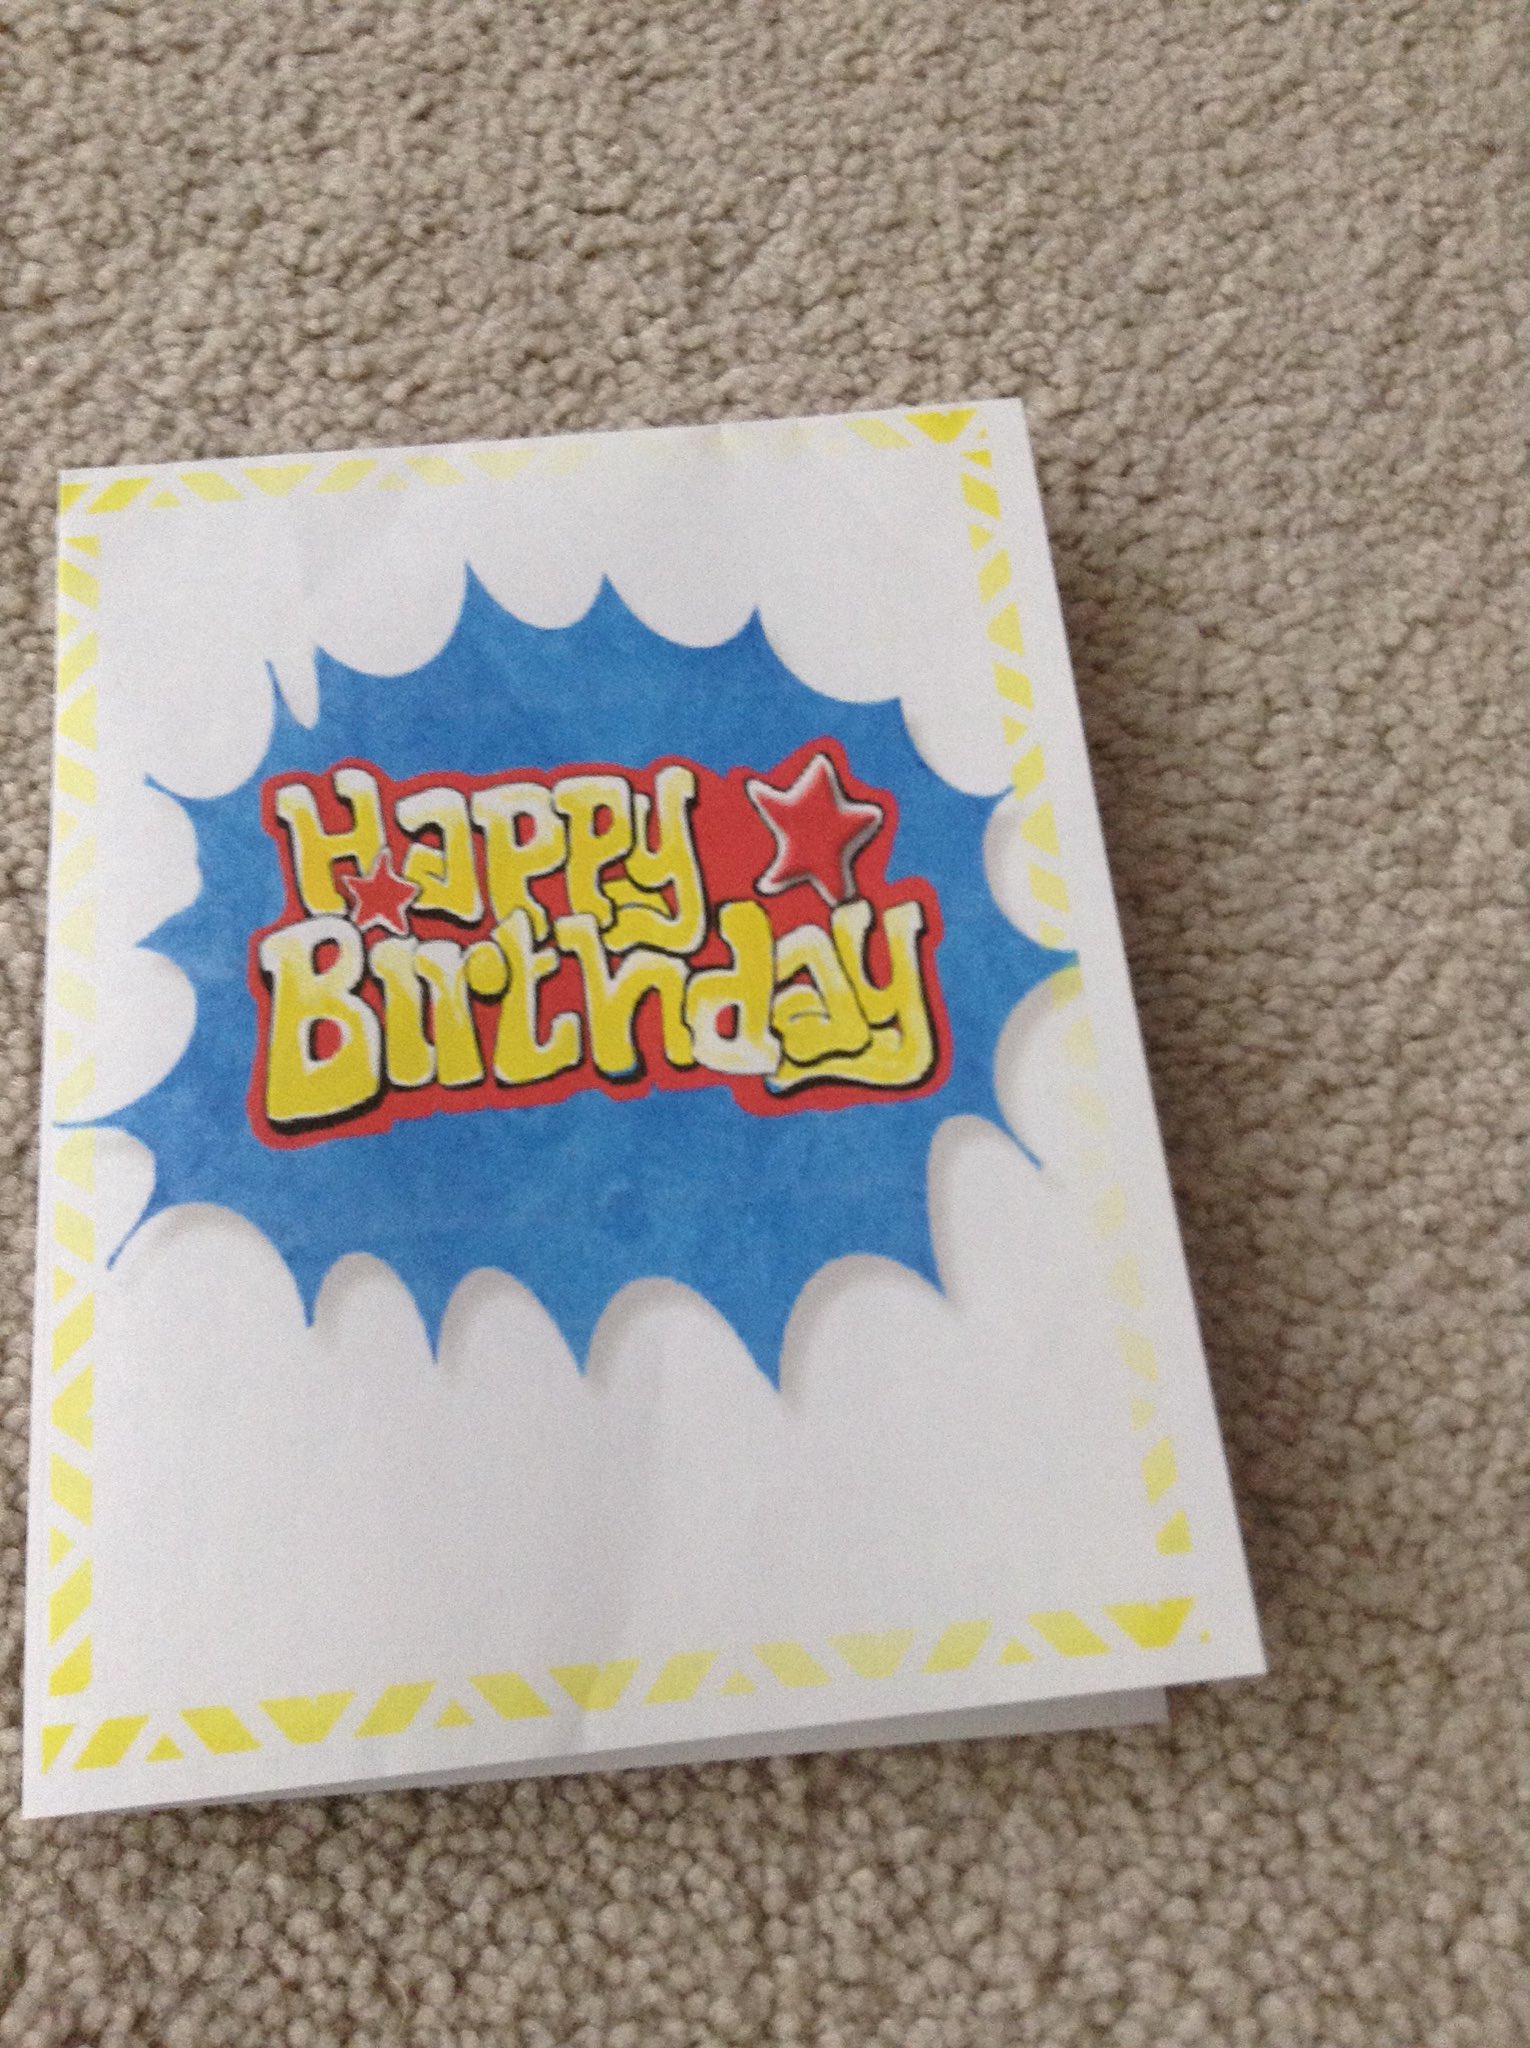  Happy Birthday to you here is a special card for you      